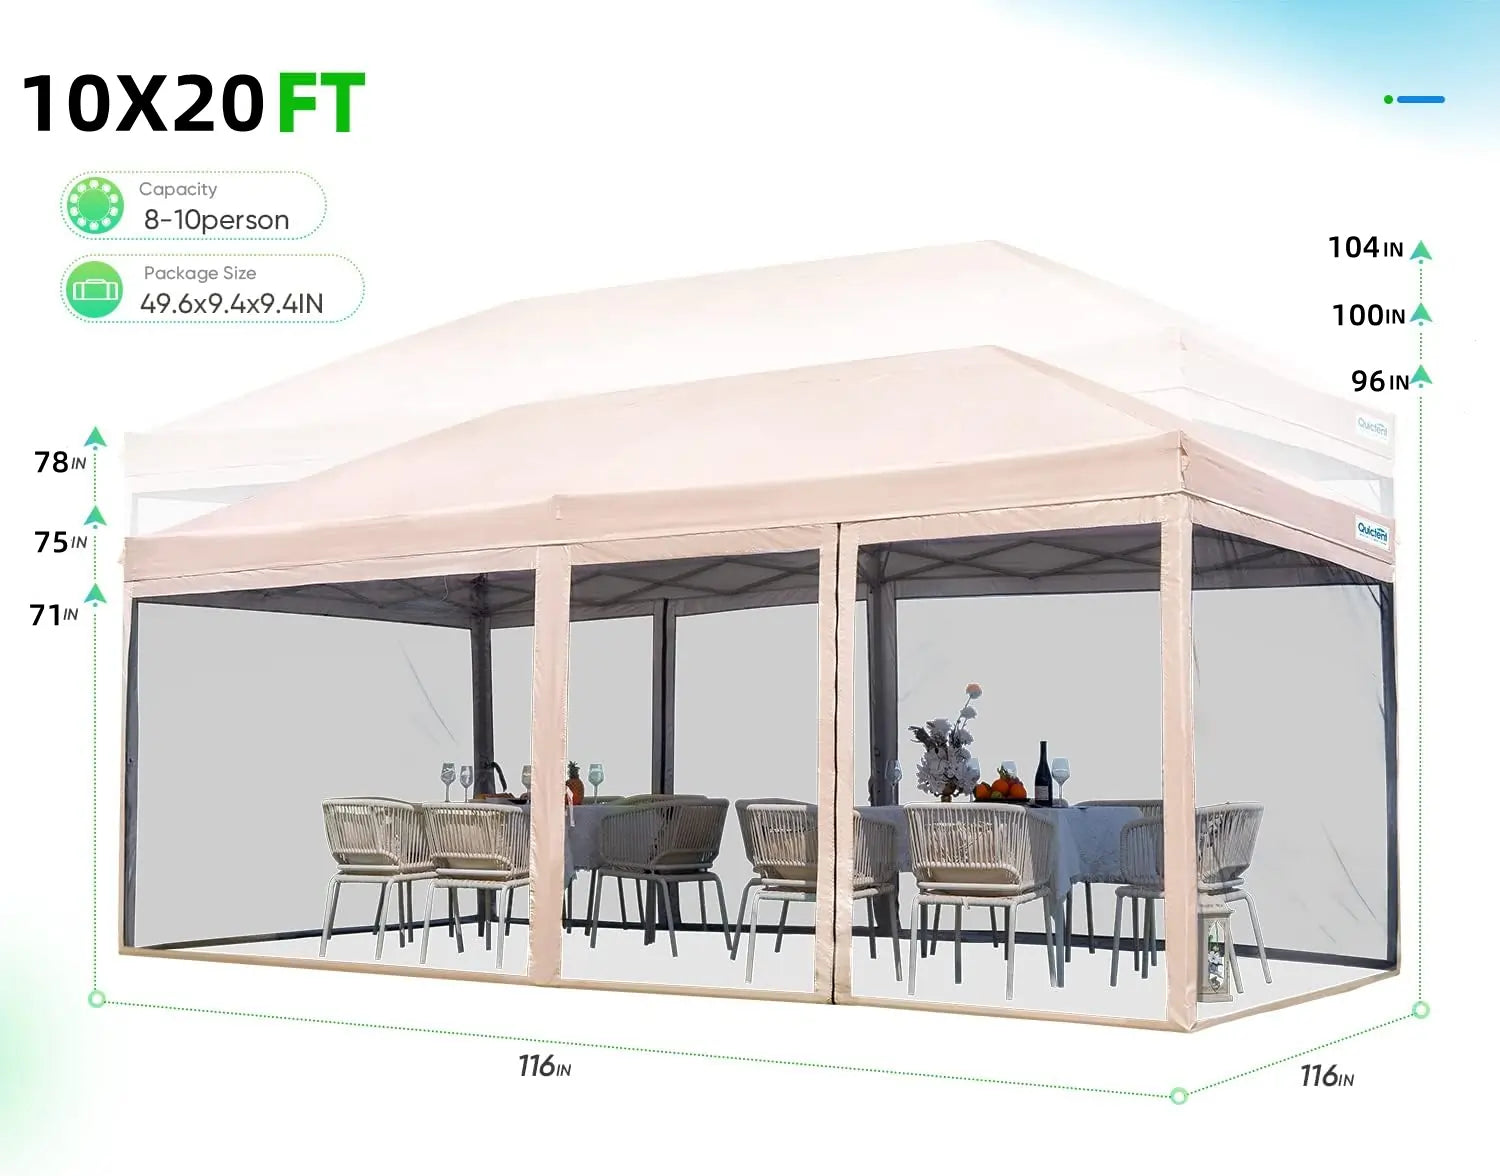 10x20 screen canopy size